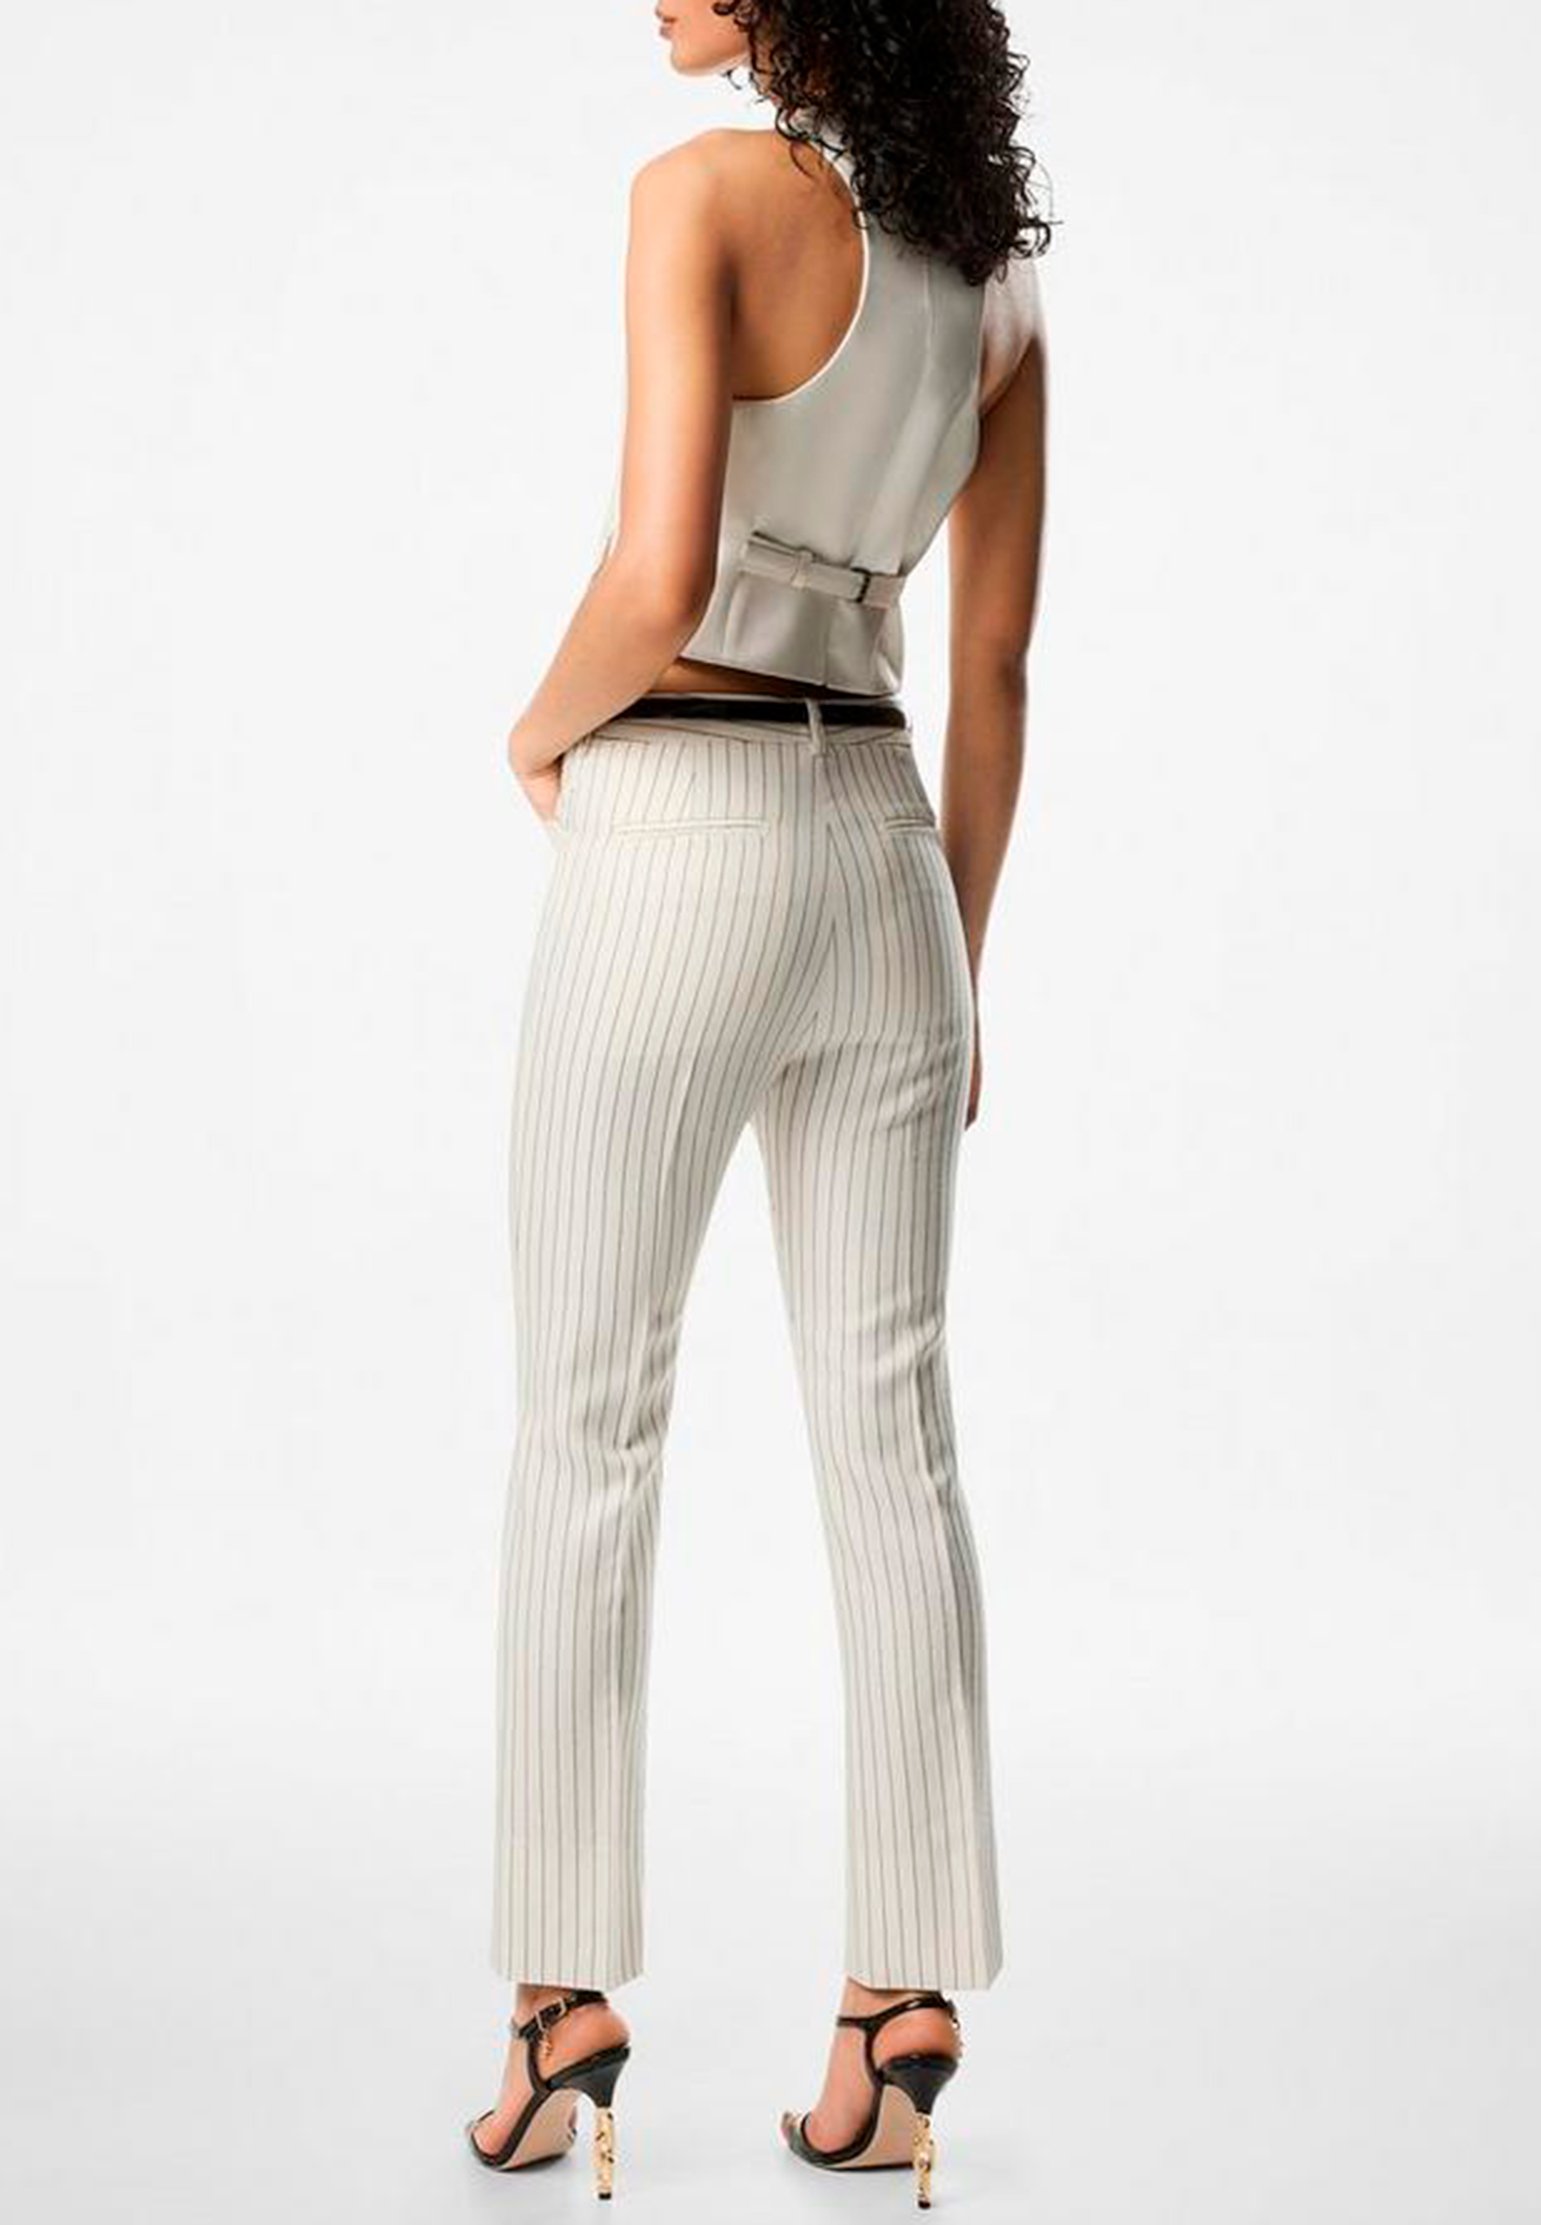 Waistcoat TOM FORD Color: cream (Code: 3705) in online store Allure